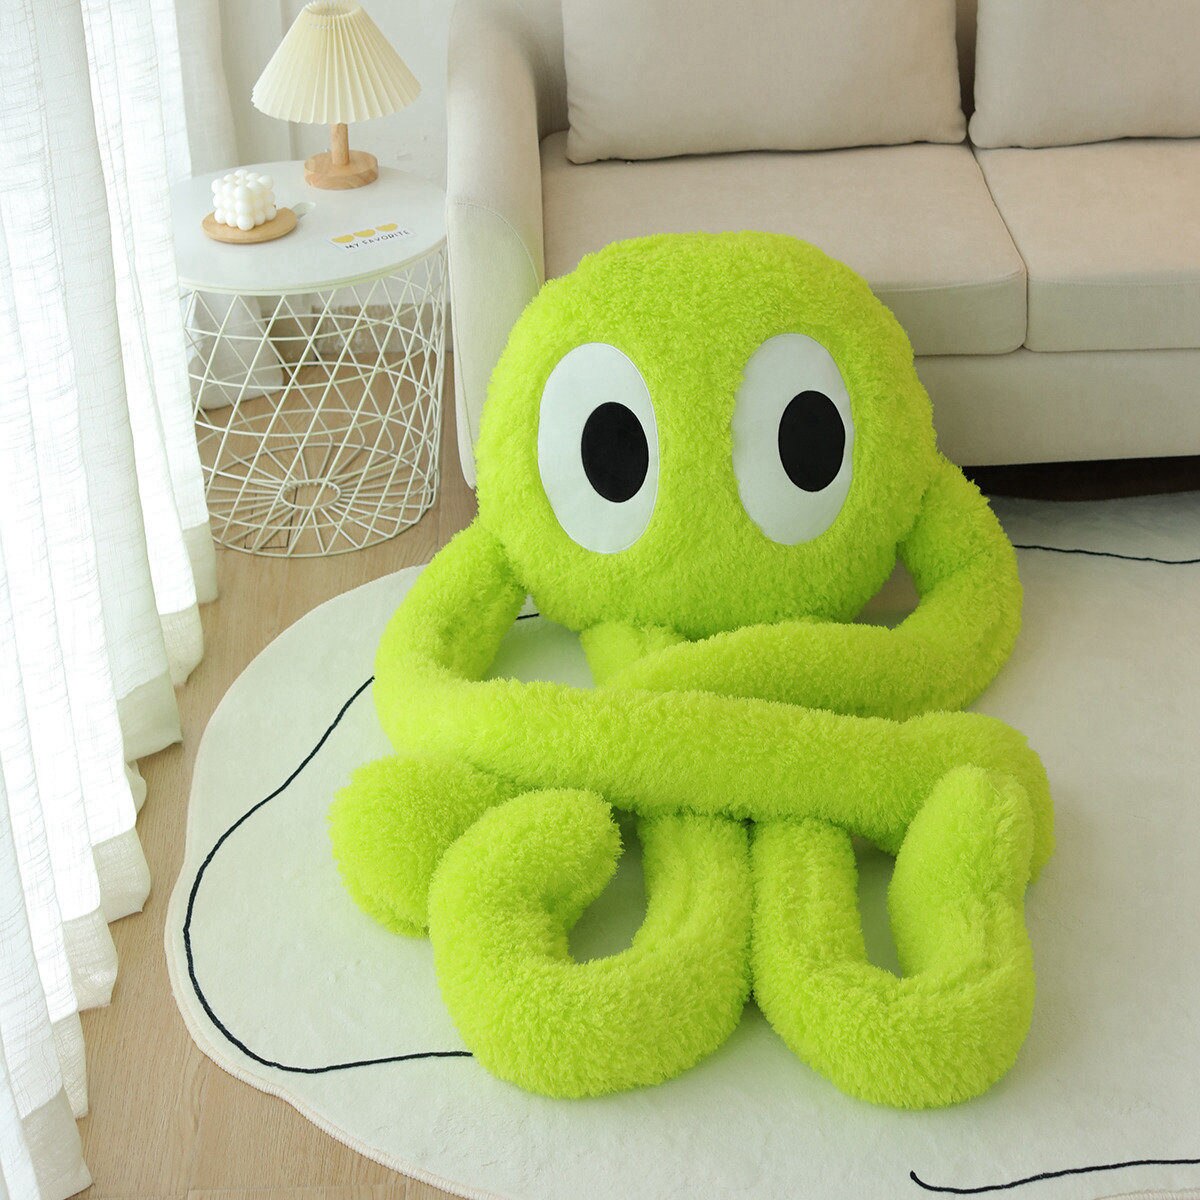 1 6 2M Hot Giant Octopus Pillow Long Legs Arms Monster Plush Toy Sofa Cushion Home 1